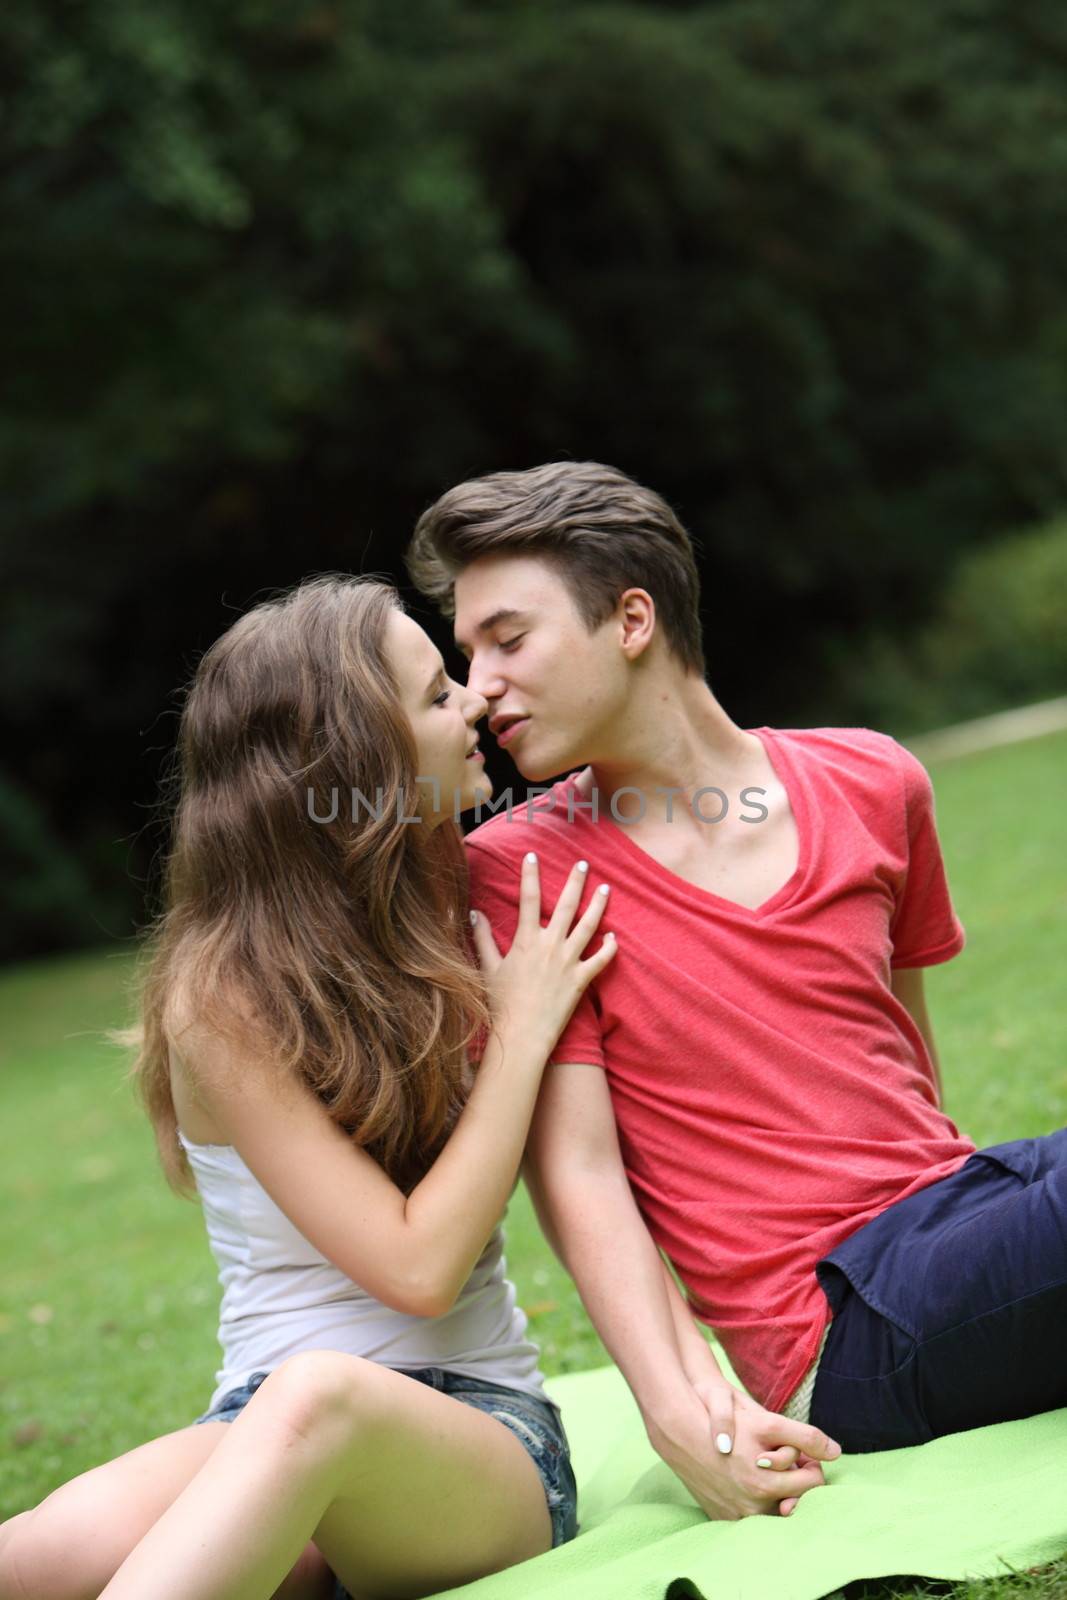 Romantic young teenage couple kissing by Farina6000